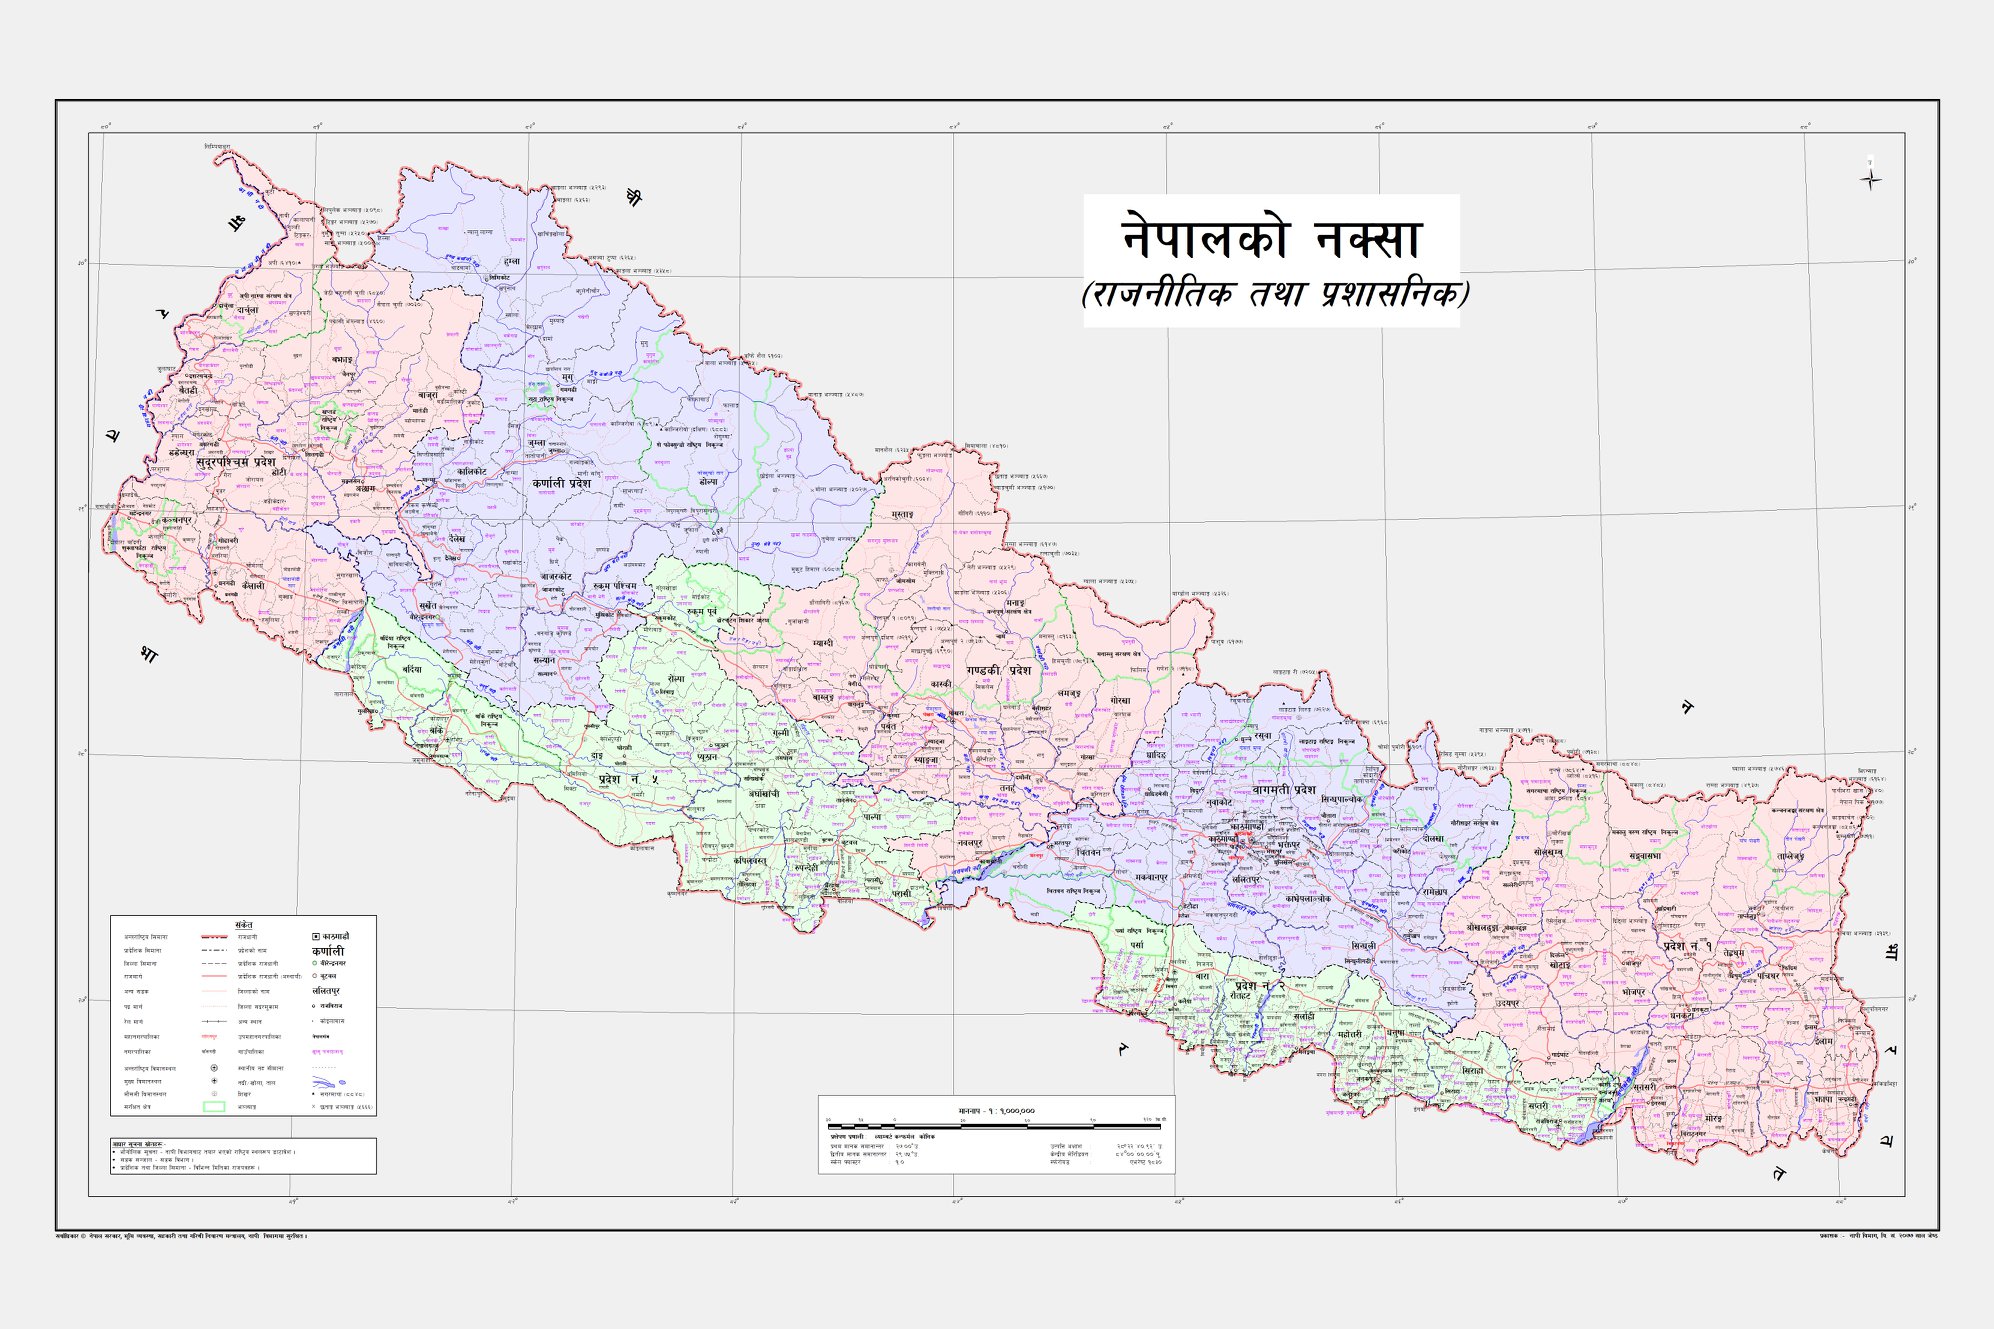 The new political map of the country issued by the government of Nepal, on Monday, May 18, 2020, and launched on Wednesday, May 20, 2020.